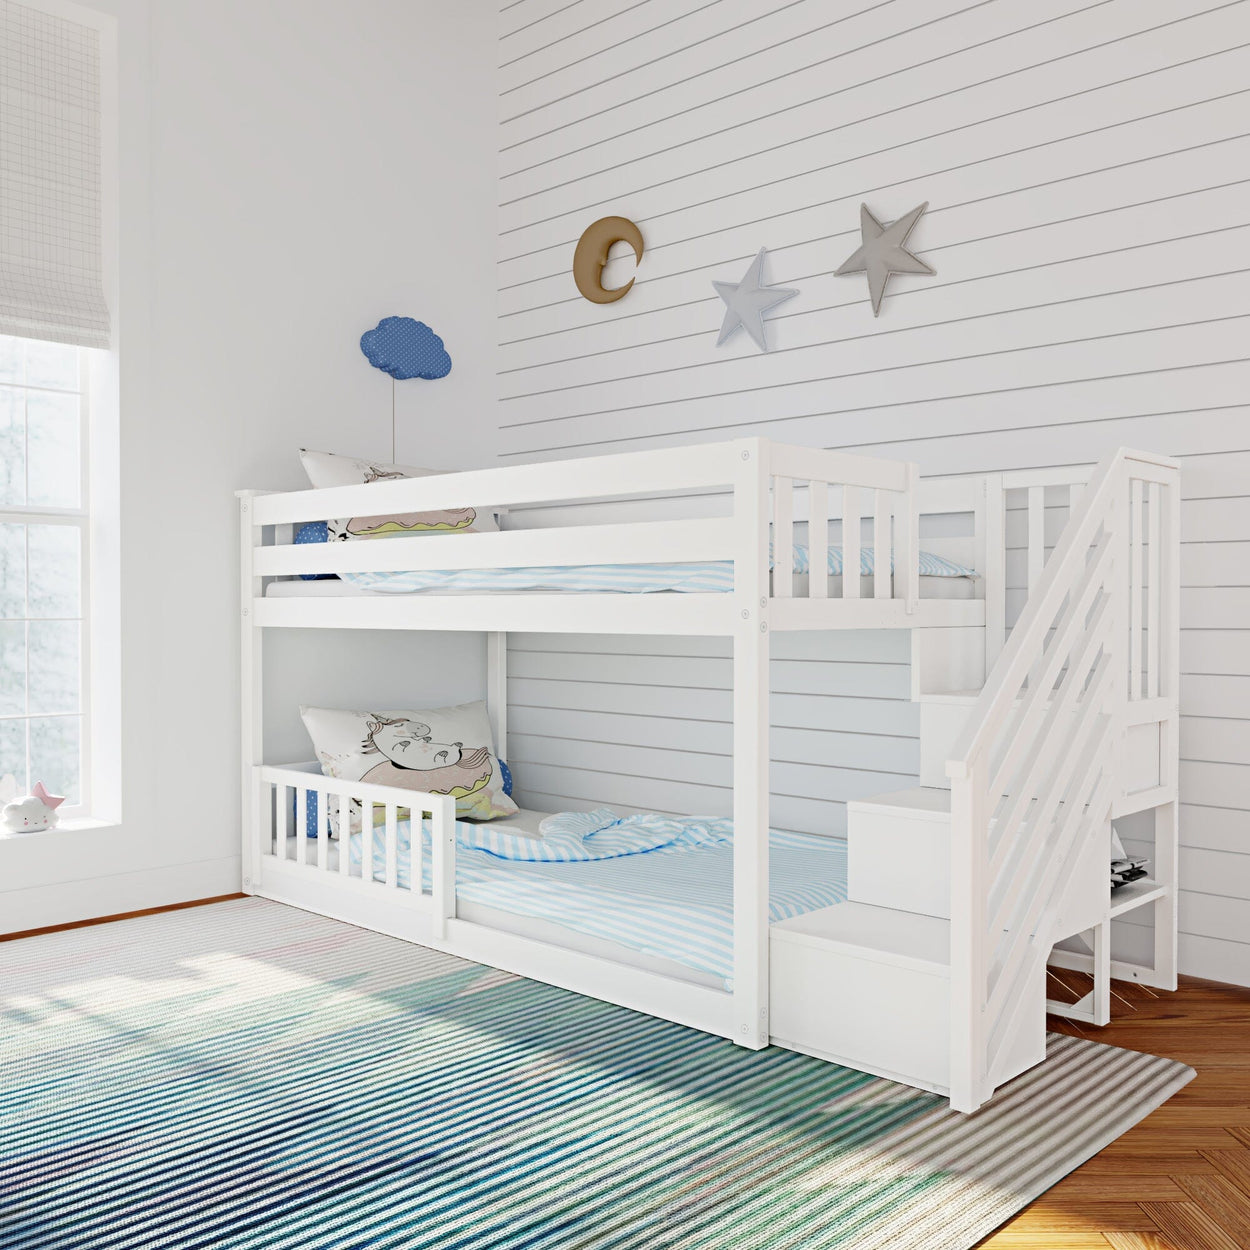 185220002109 : Bunk Beds Low Bunk with Stairs and Single Guard Rail, White